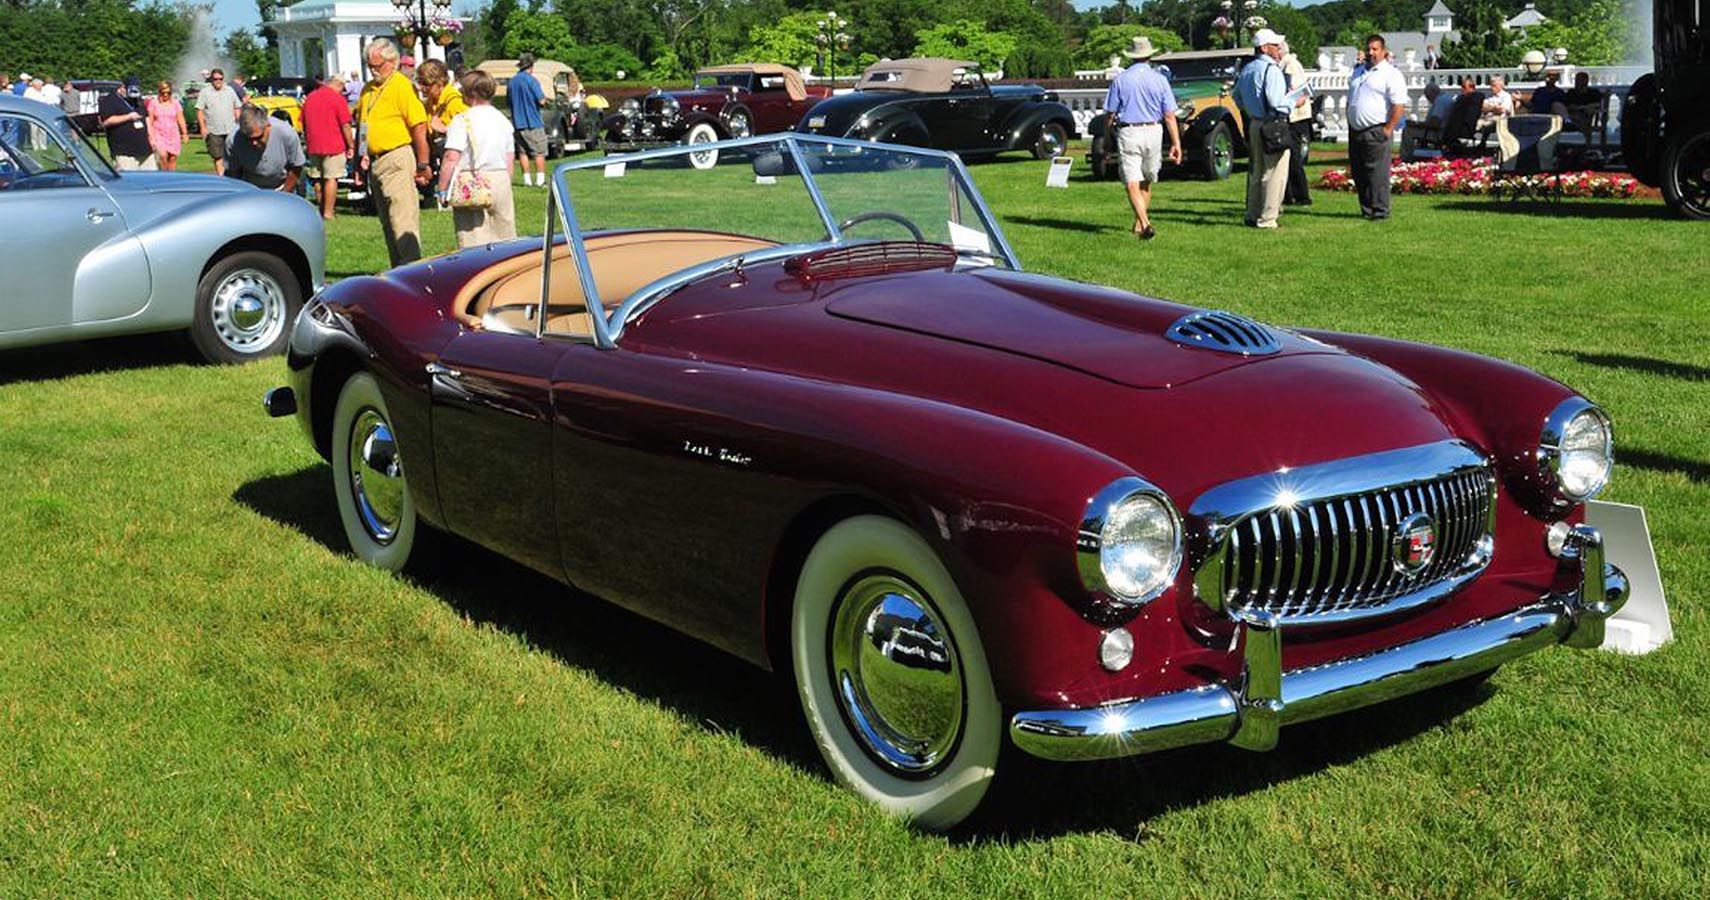 The Very First Nash-Healey That Rolled Off The Assembly Line, Bearing Chassis No. N2001, And Wearing A Panelcraft Alloy Body Is The Rarest Of Them All